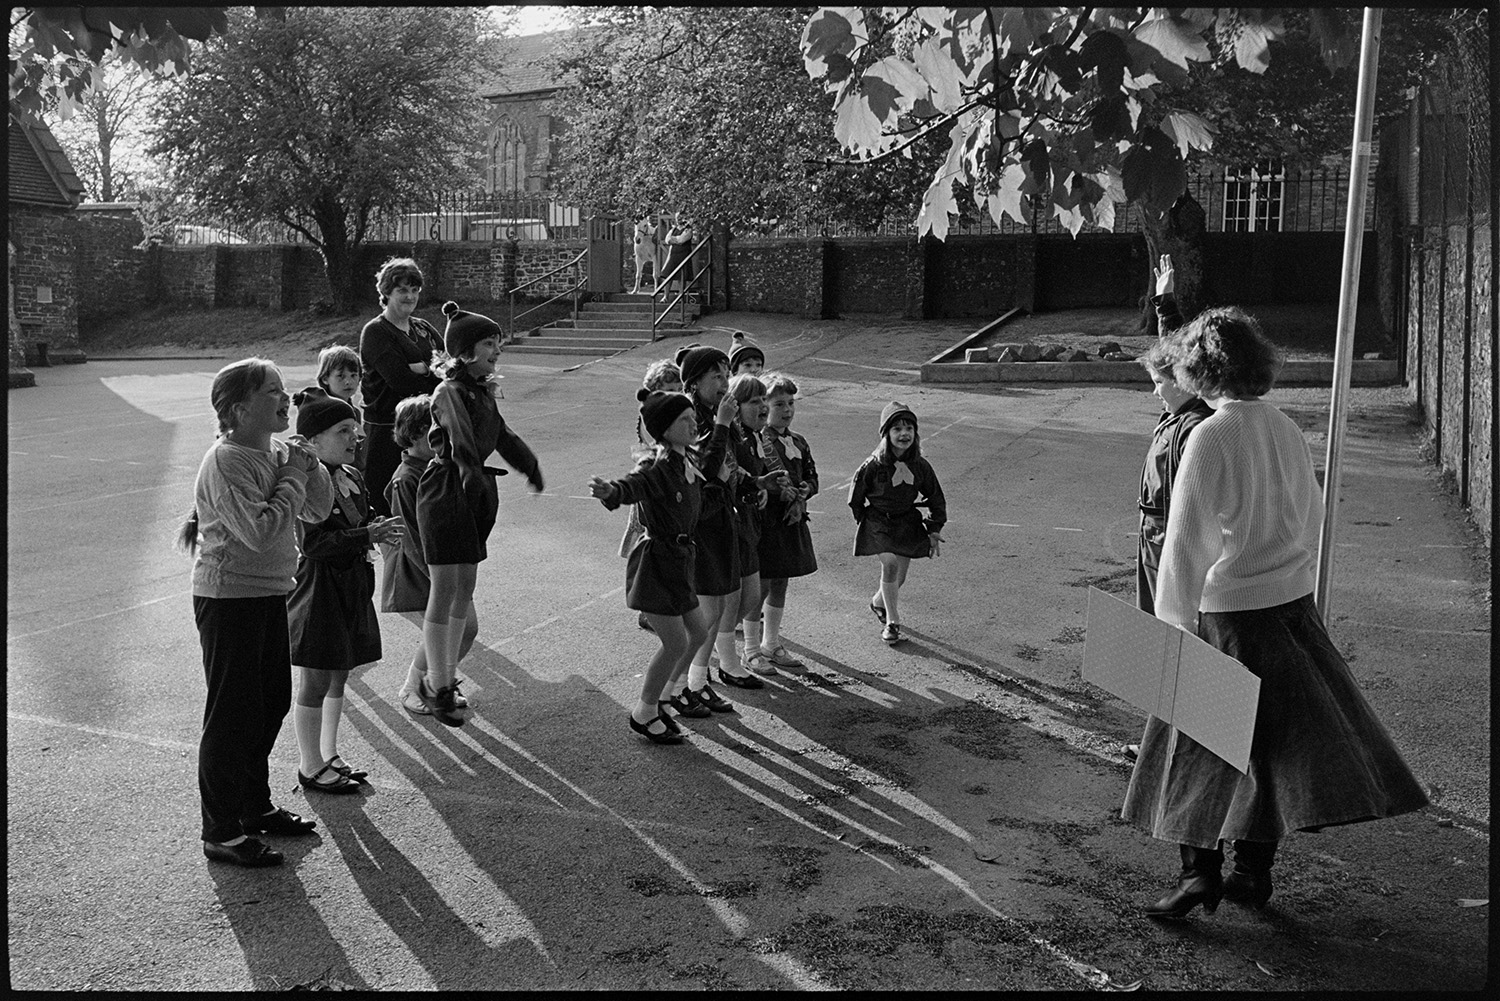 Brownies roll call in school playground.
[Pip Gilson with a group of Brownies doing a roll call in the playground at Chulmleigh Primary School.]